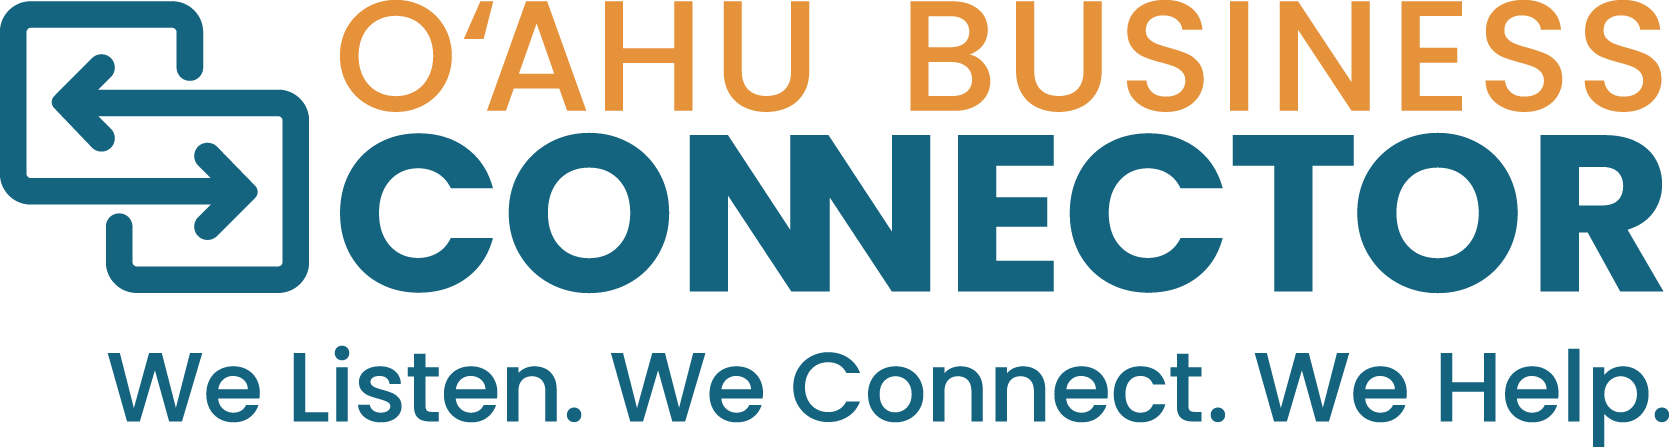 Oahu Business Connnector